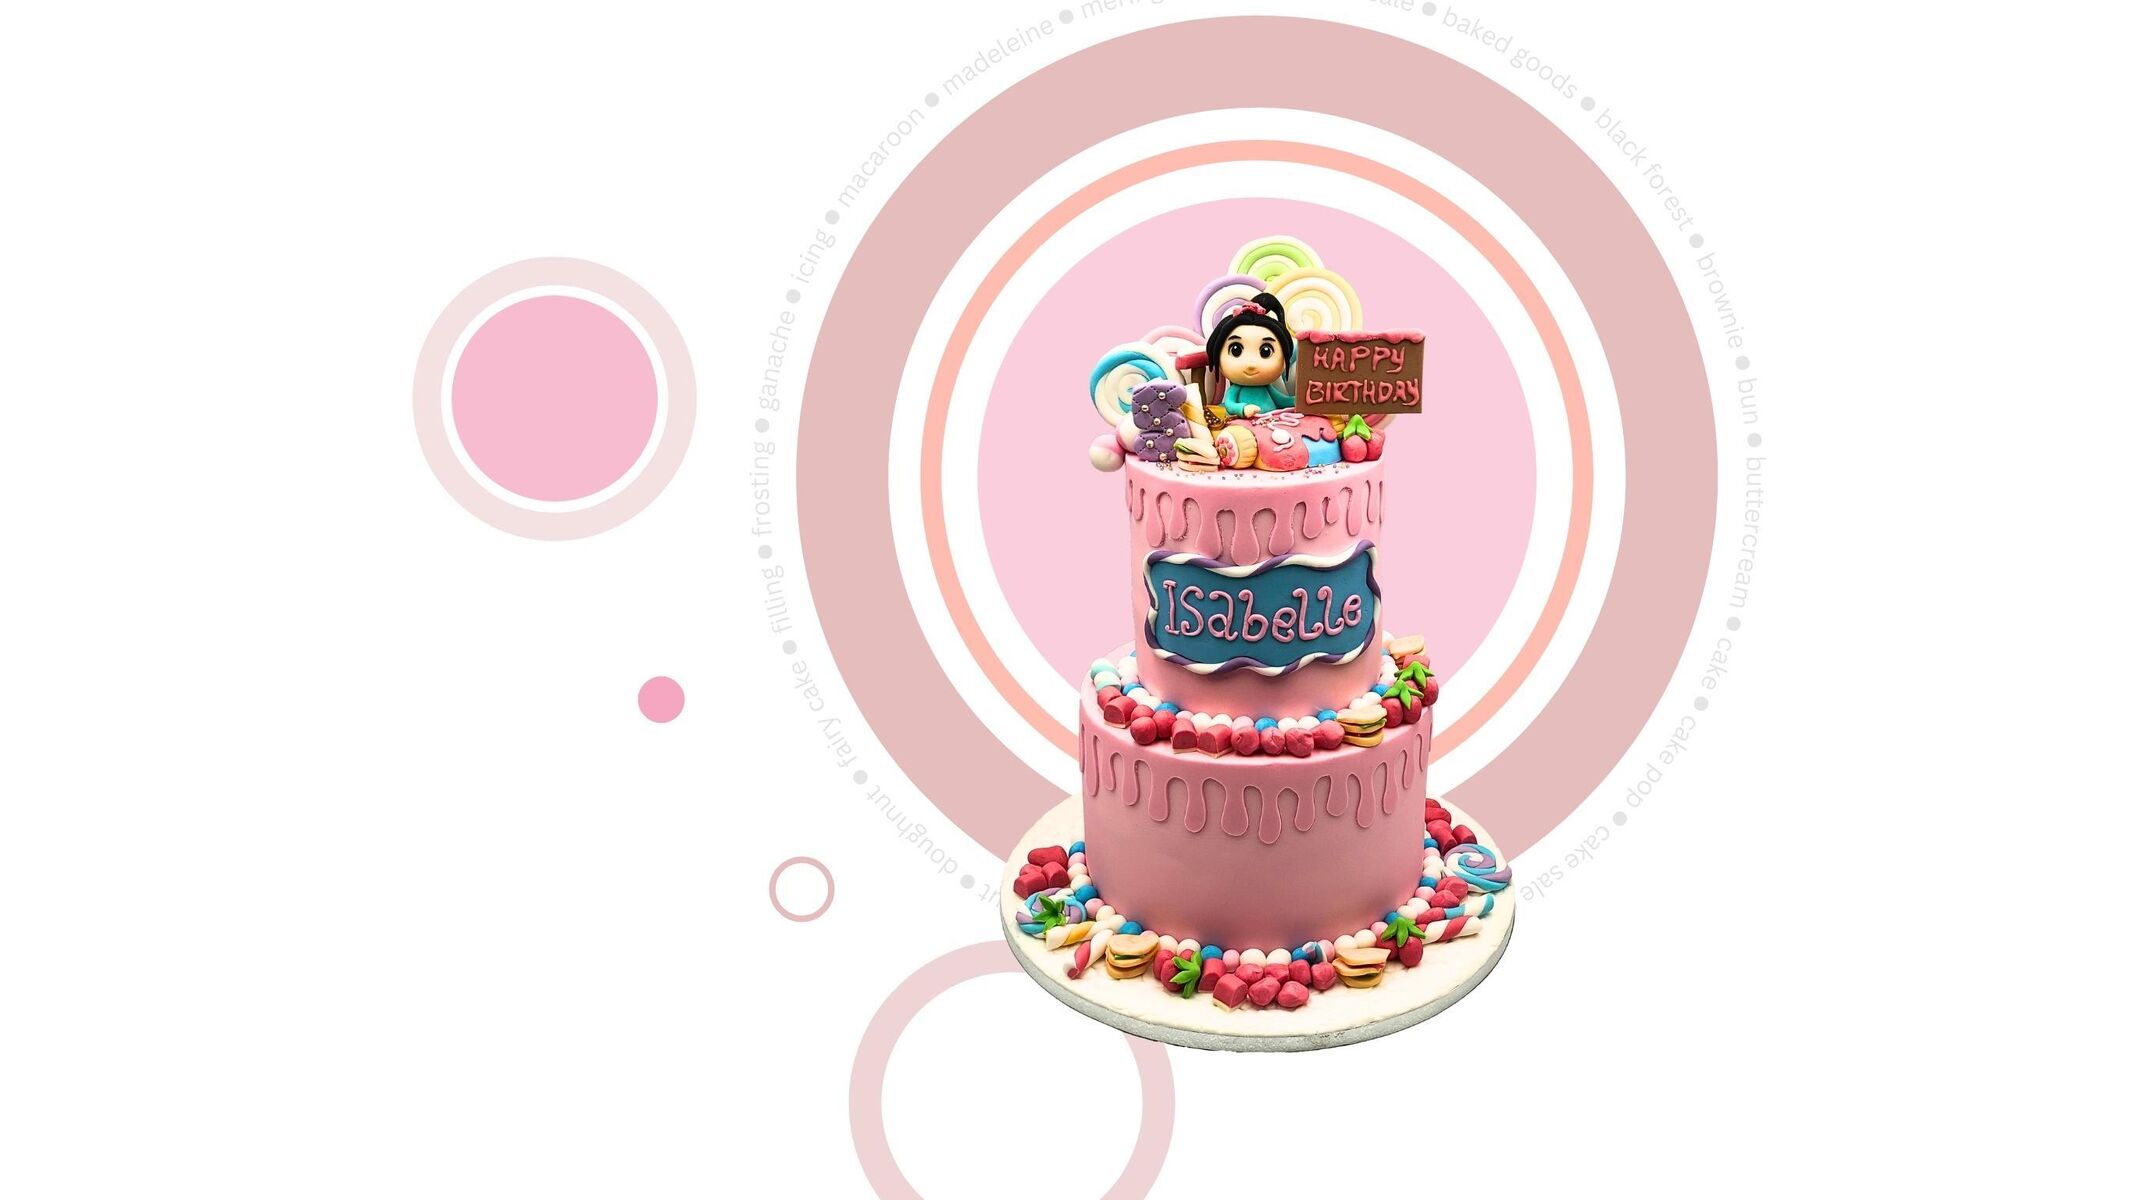 JAY'S CAKES | Handcrafted and Custom Cakes in Abu Dhabi, UAE